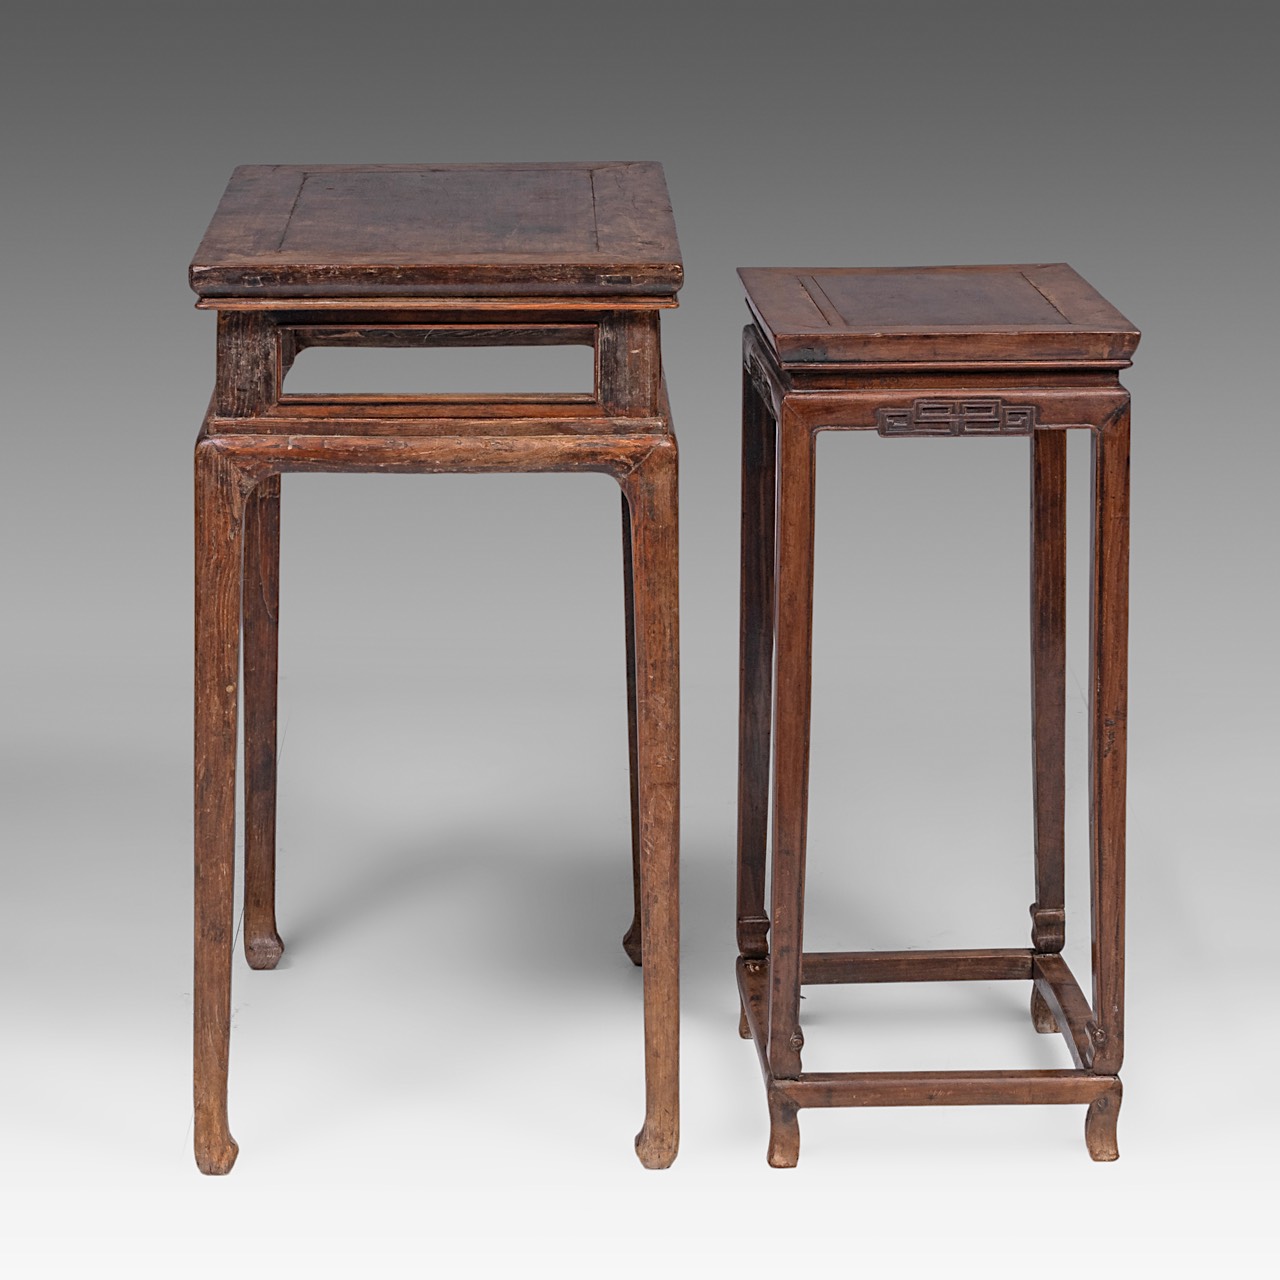 Two Chinese hardwood side tables, mid - late Qing dynasty, largest H 82 - 69 x 42 cm - Image 3 of 7